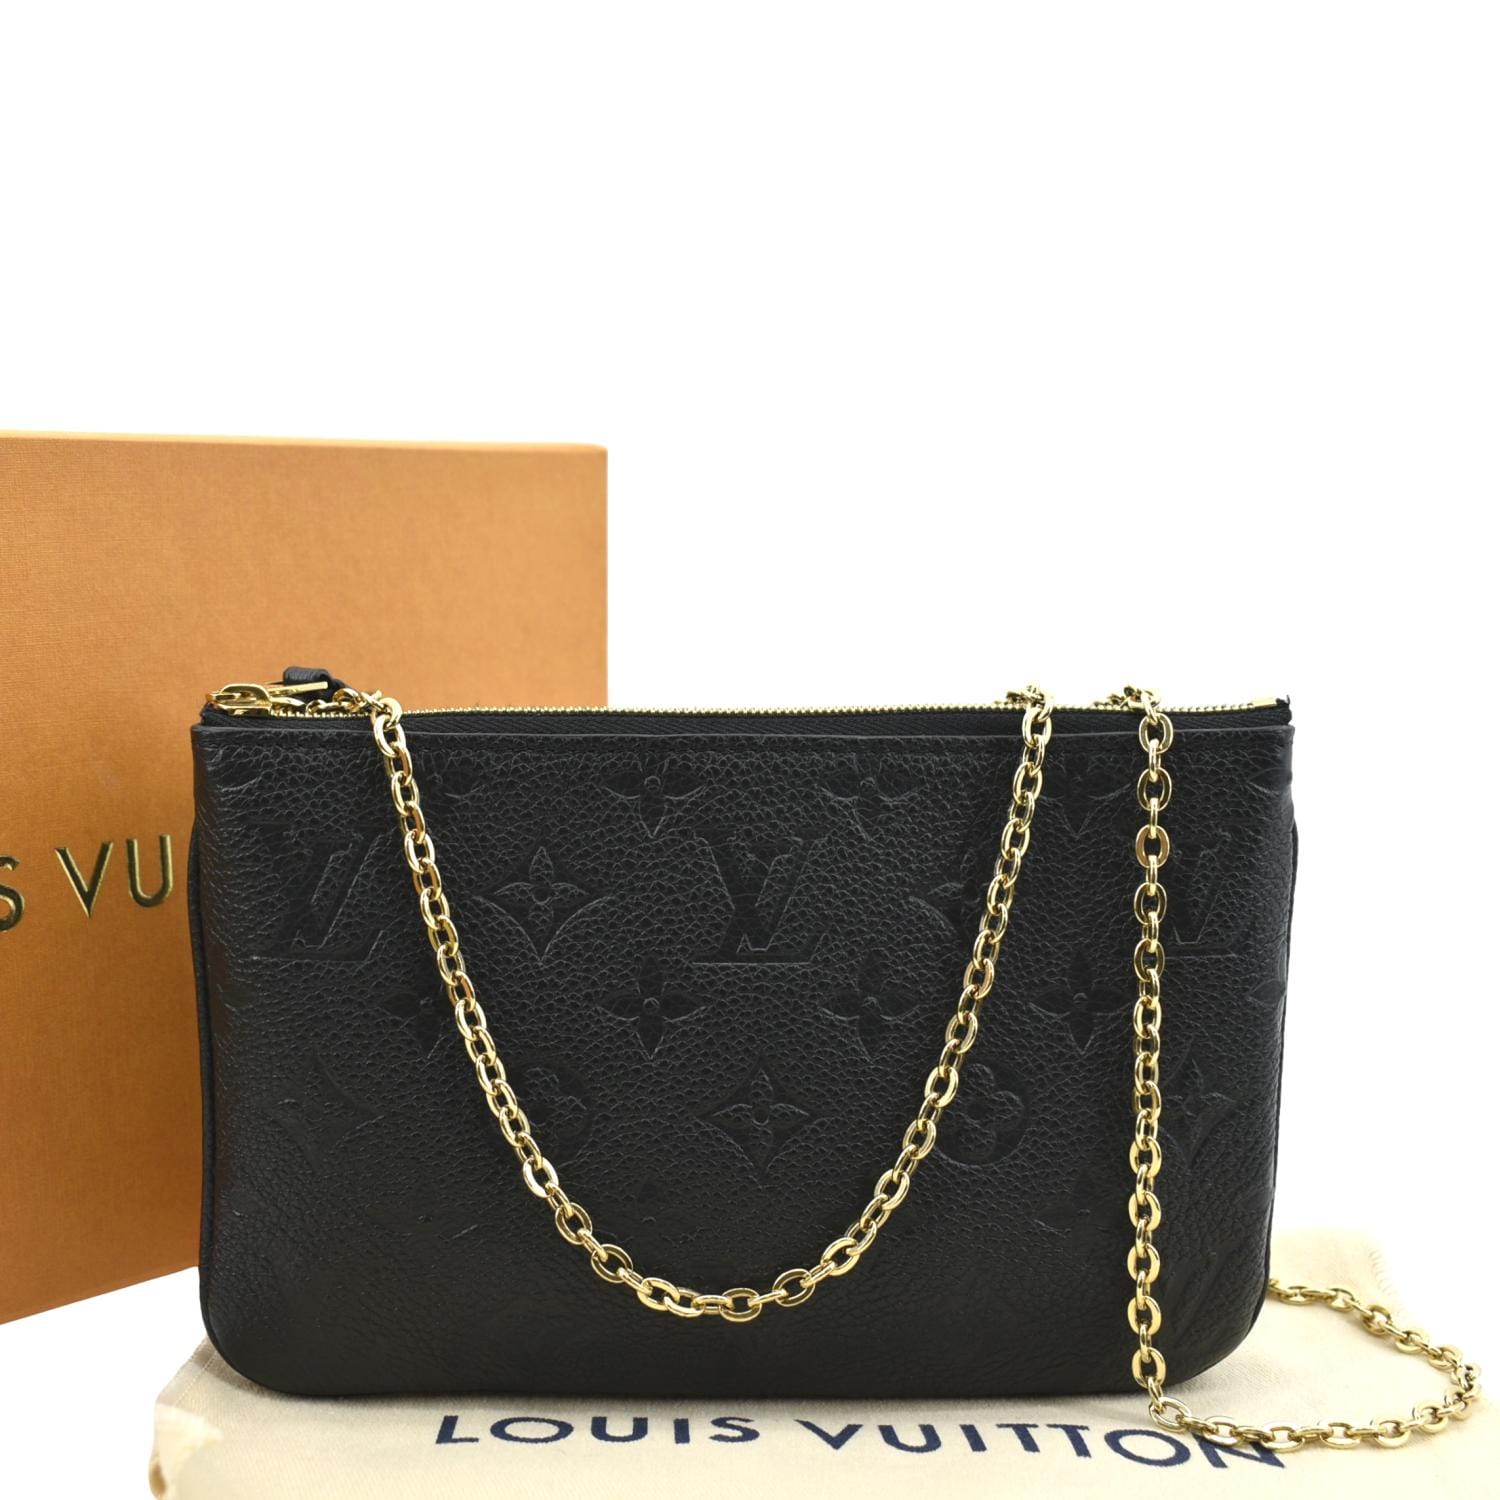 Louis Vuitton - Double Pochette with Chain - Brand new